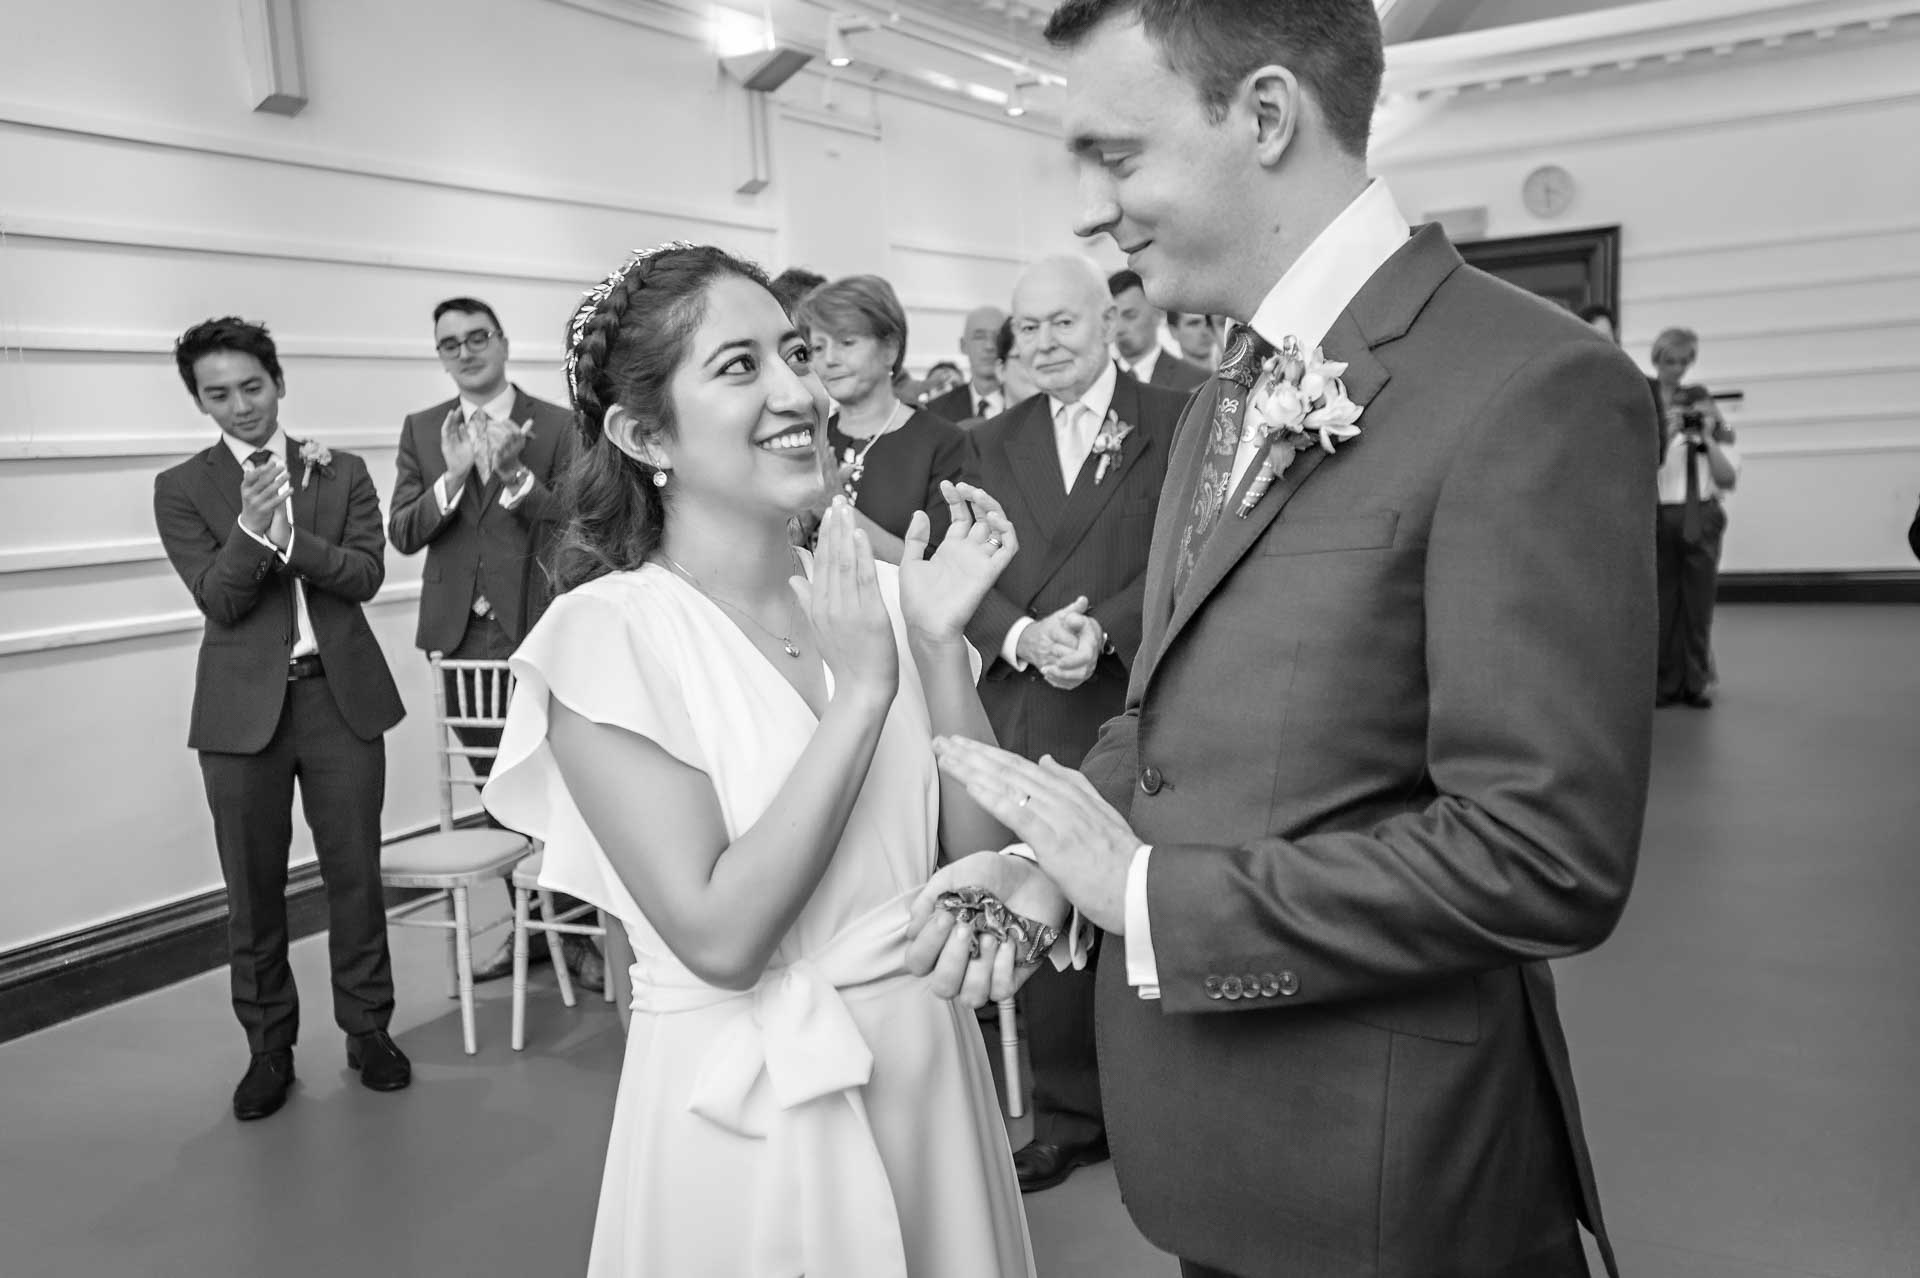 Newly-weds clapping after wedding vows at Fulham Library